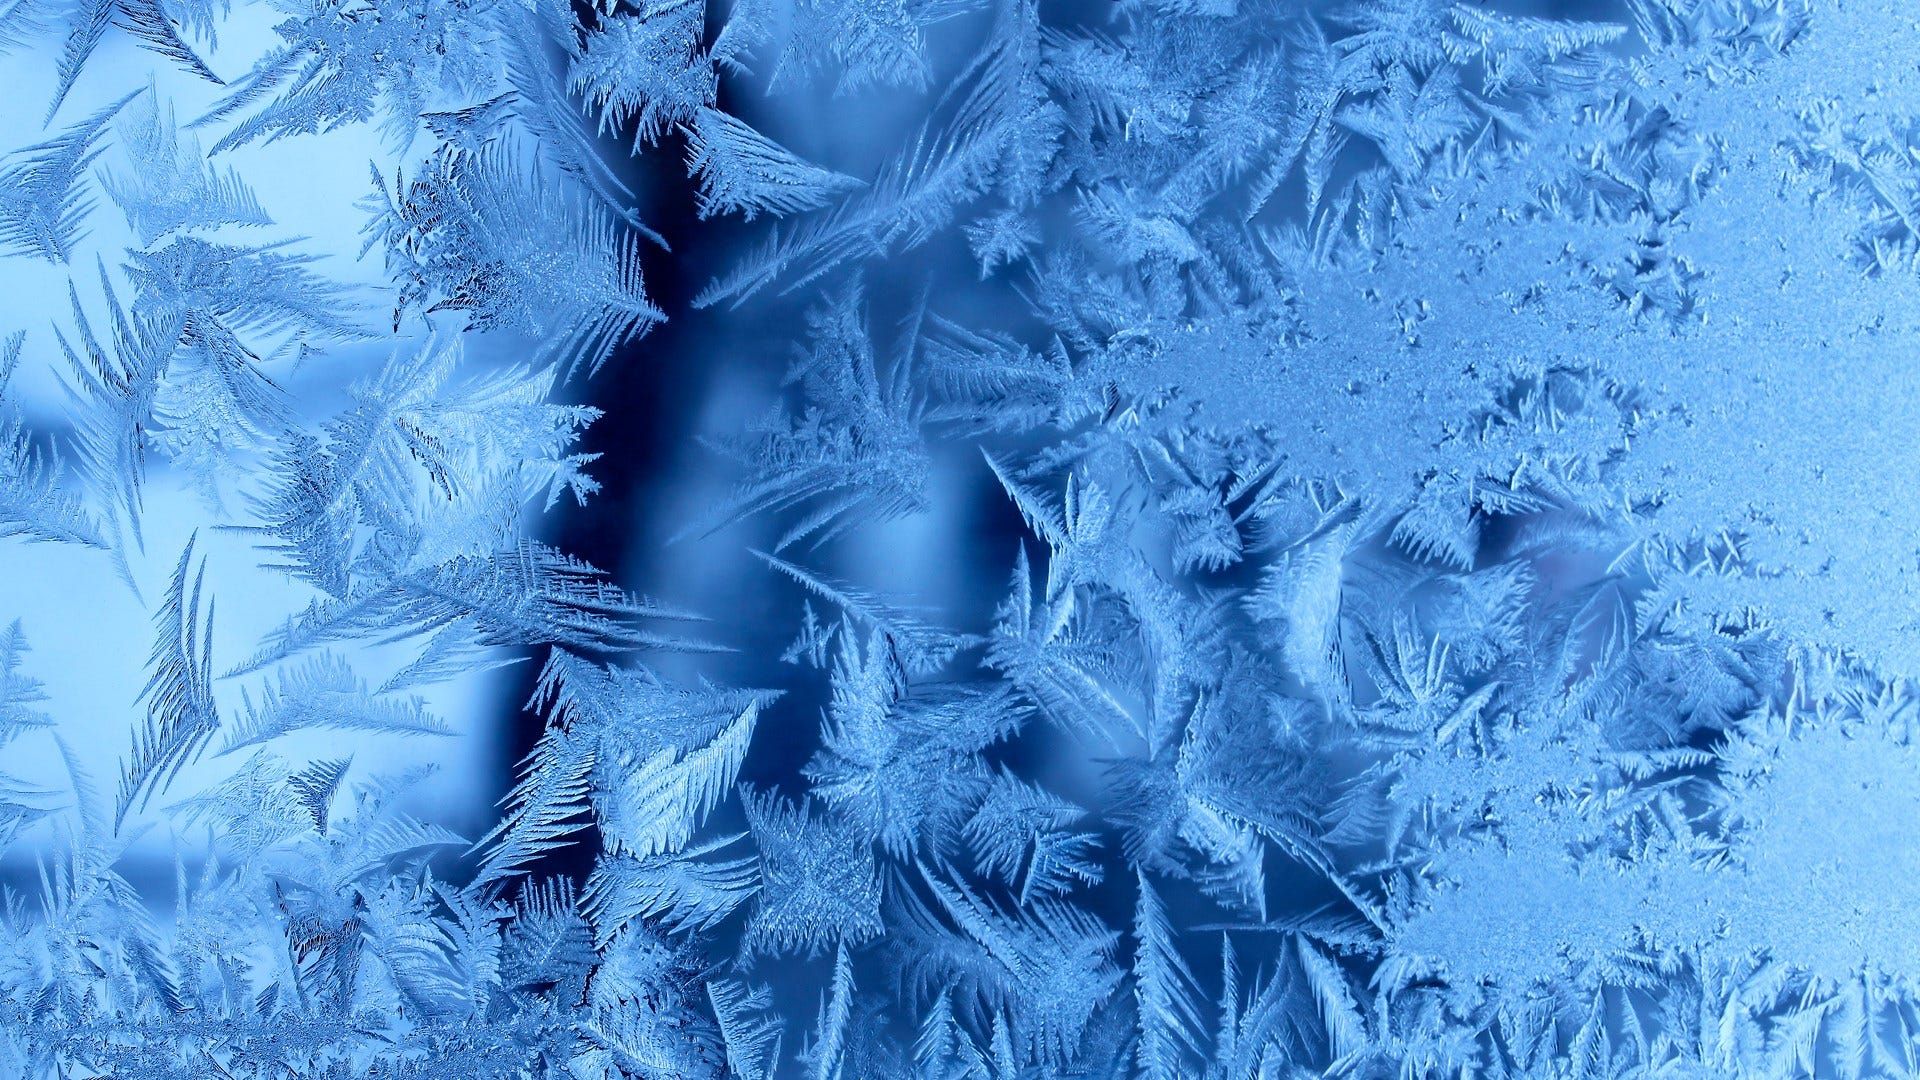 Winter Patterns On The Window computer Wallpaper